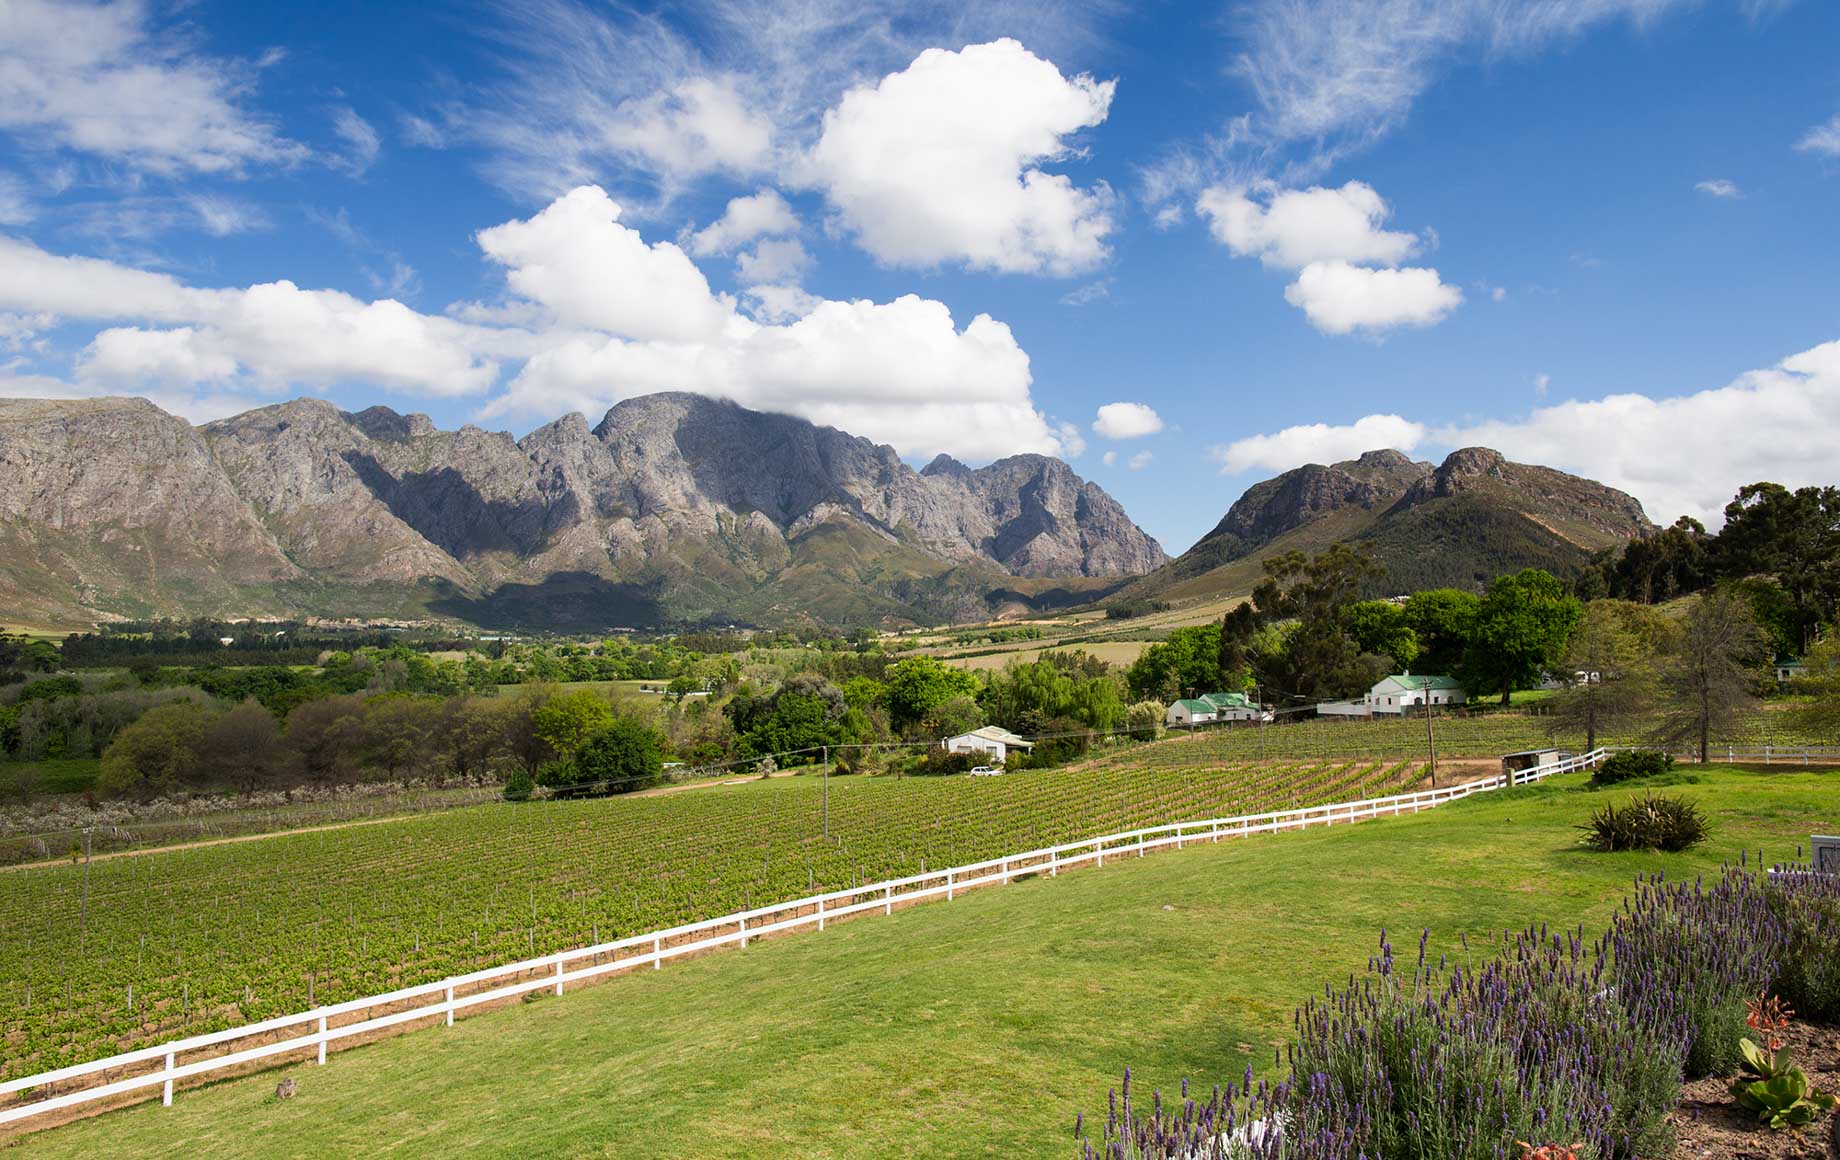 Great scenery under the sunny sky of Cape Winelands